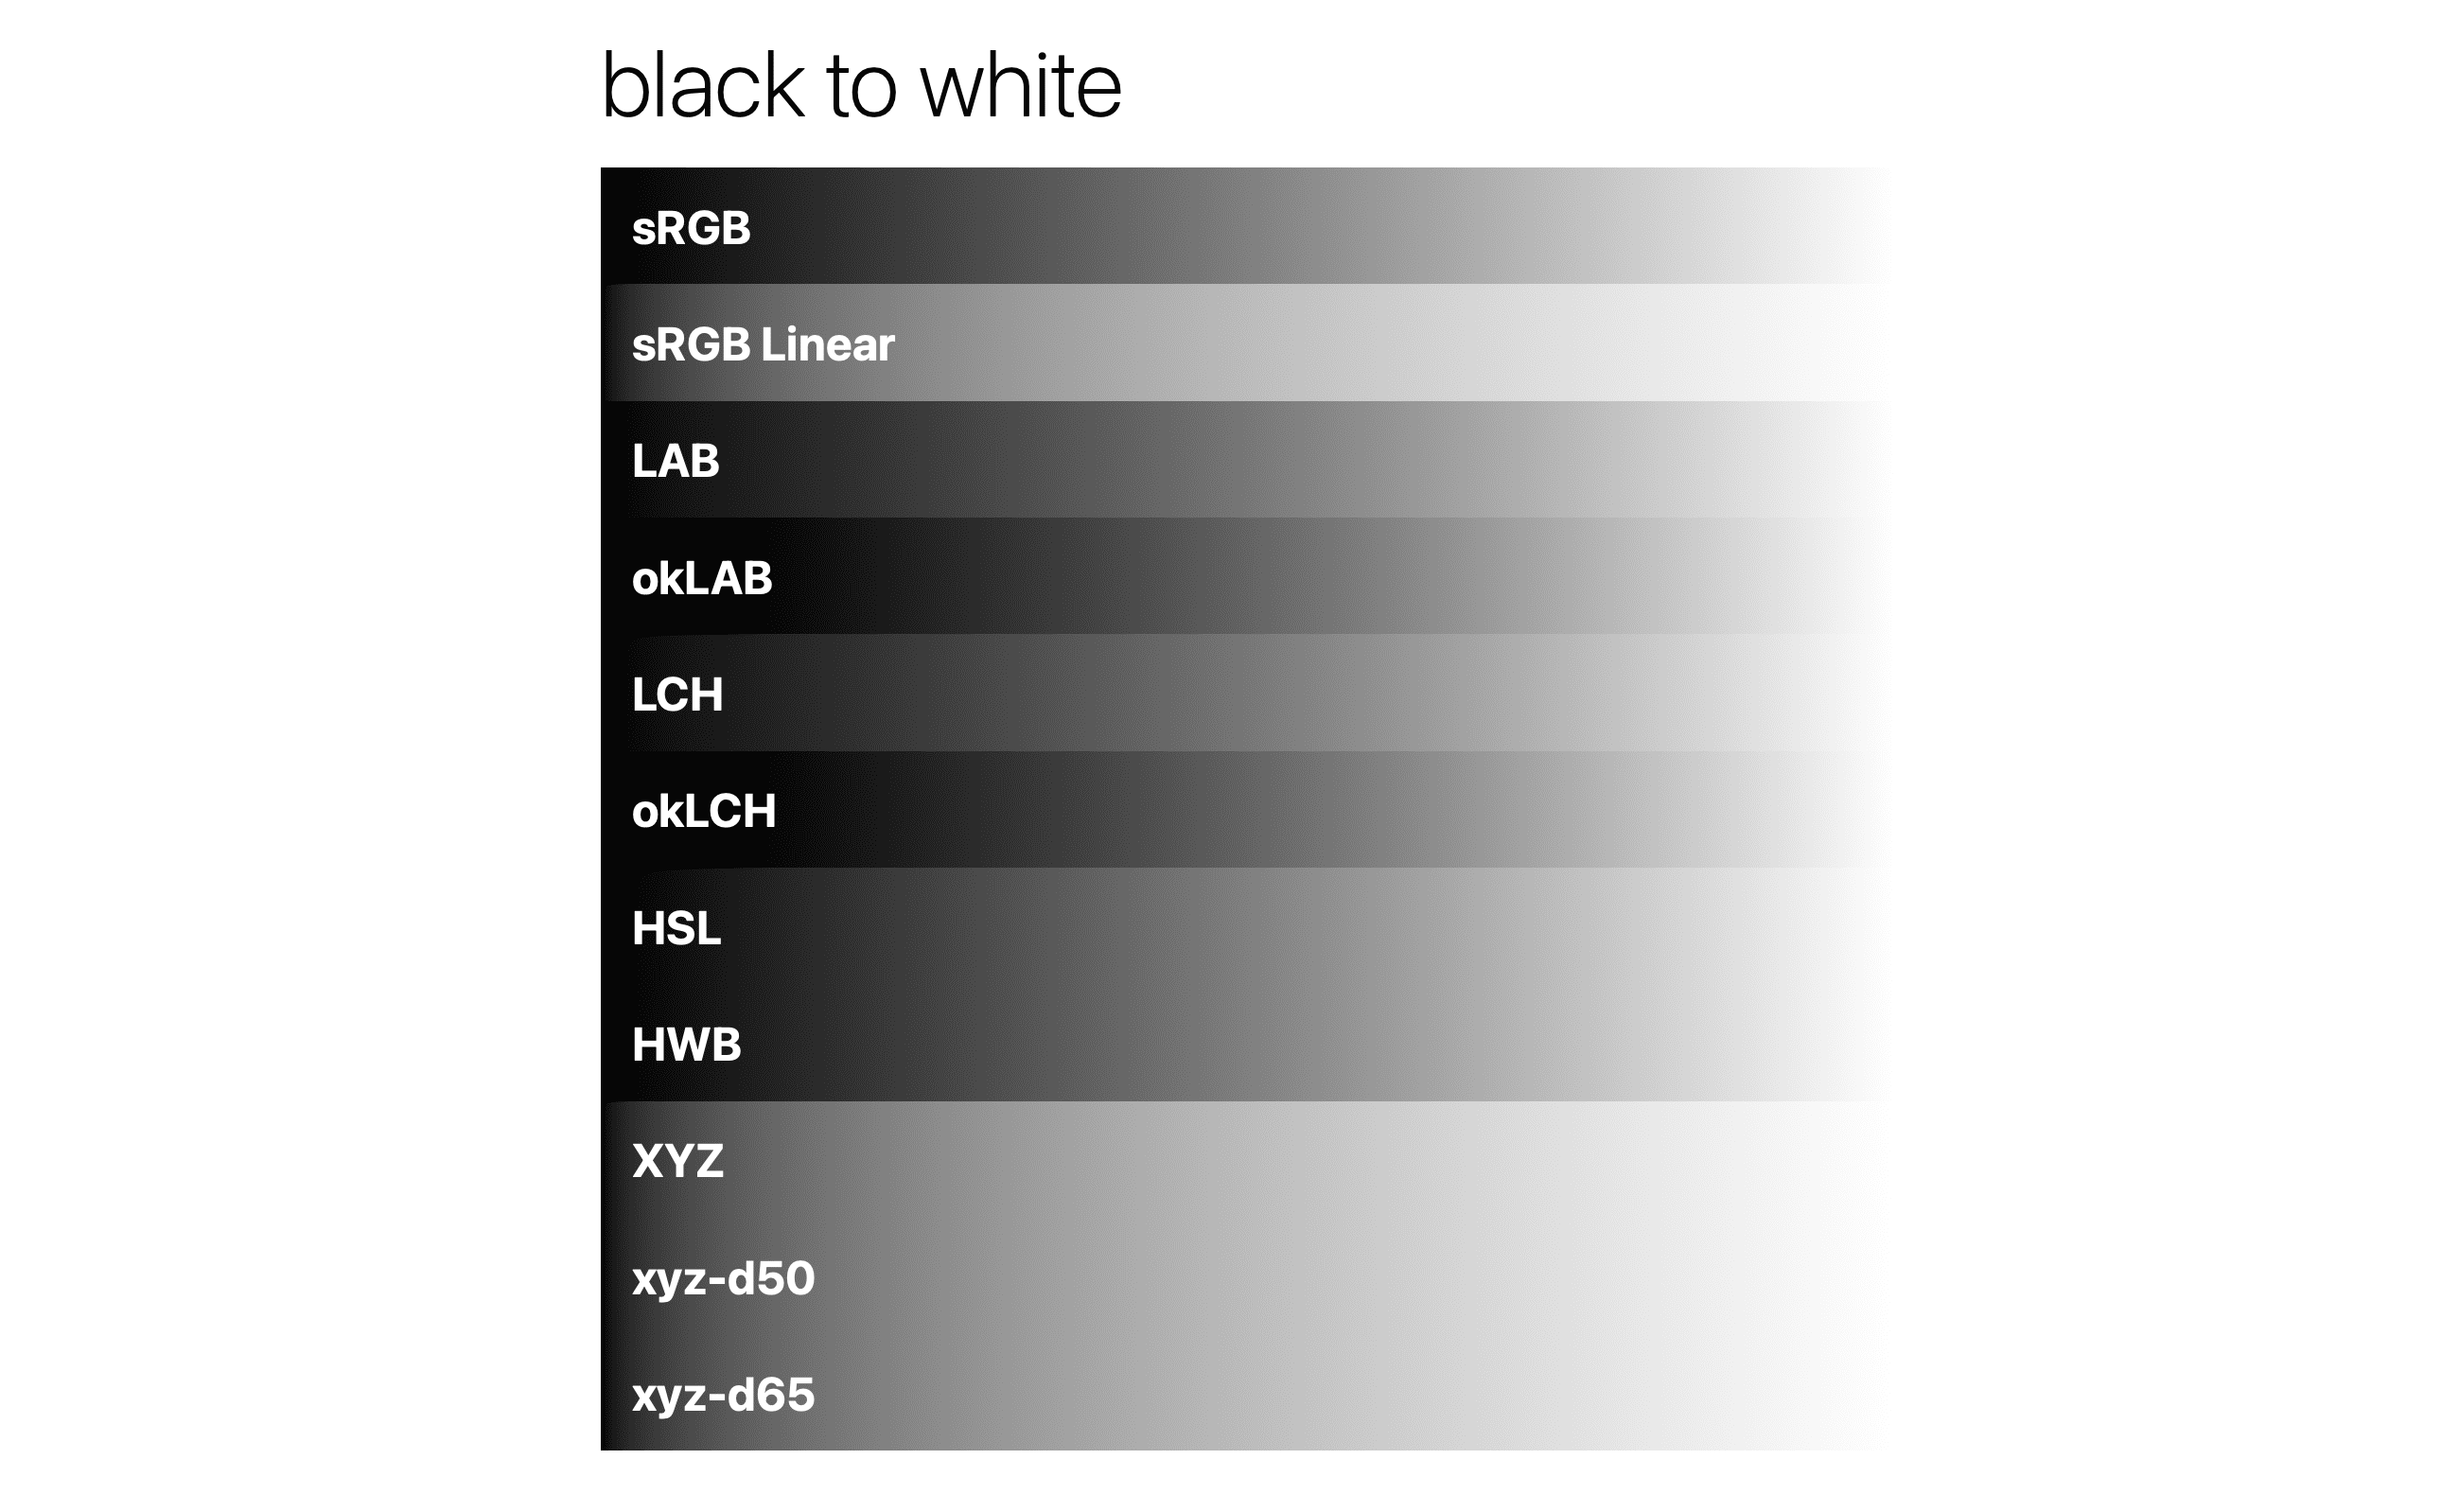 Black to white gradients in different color spaces.